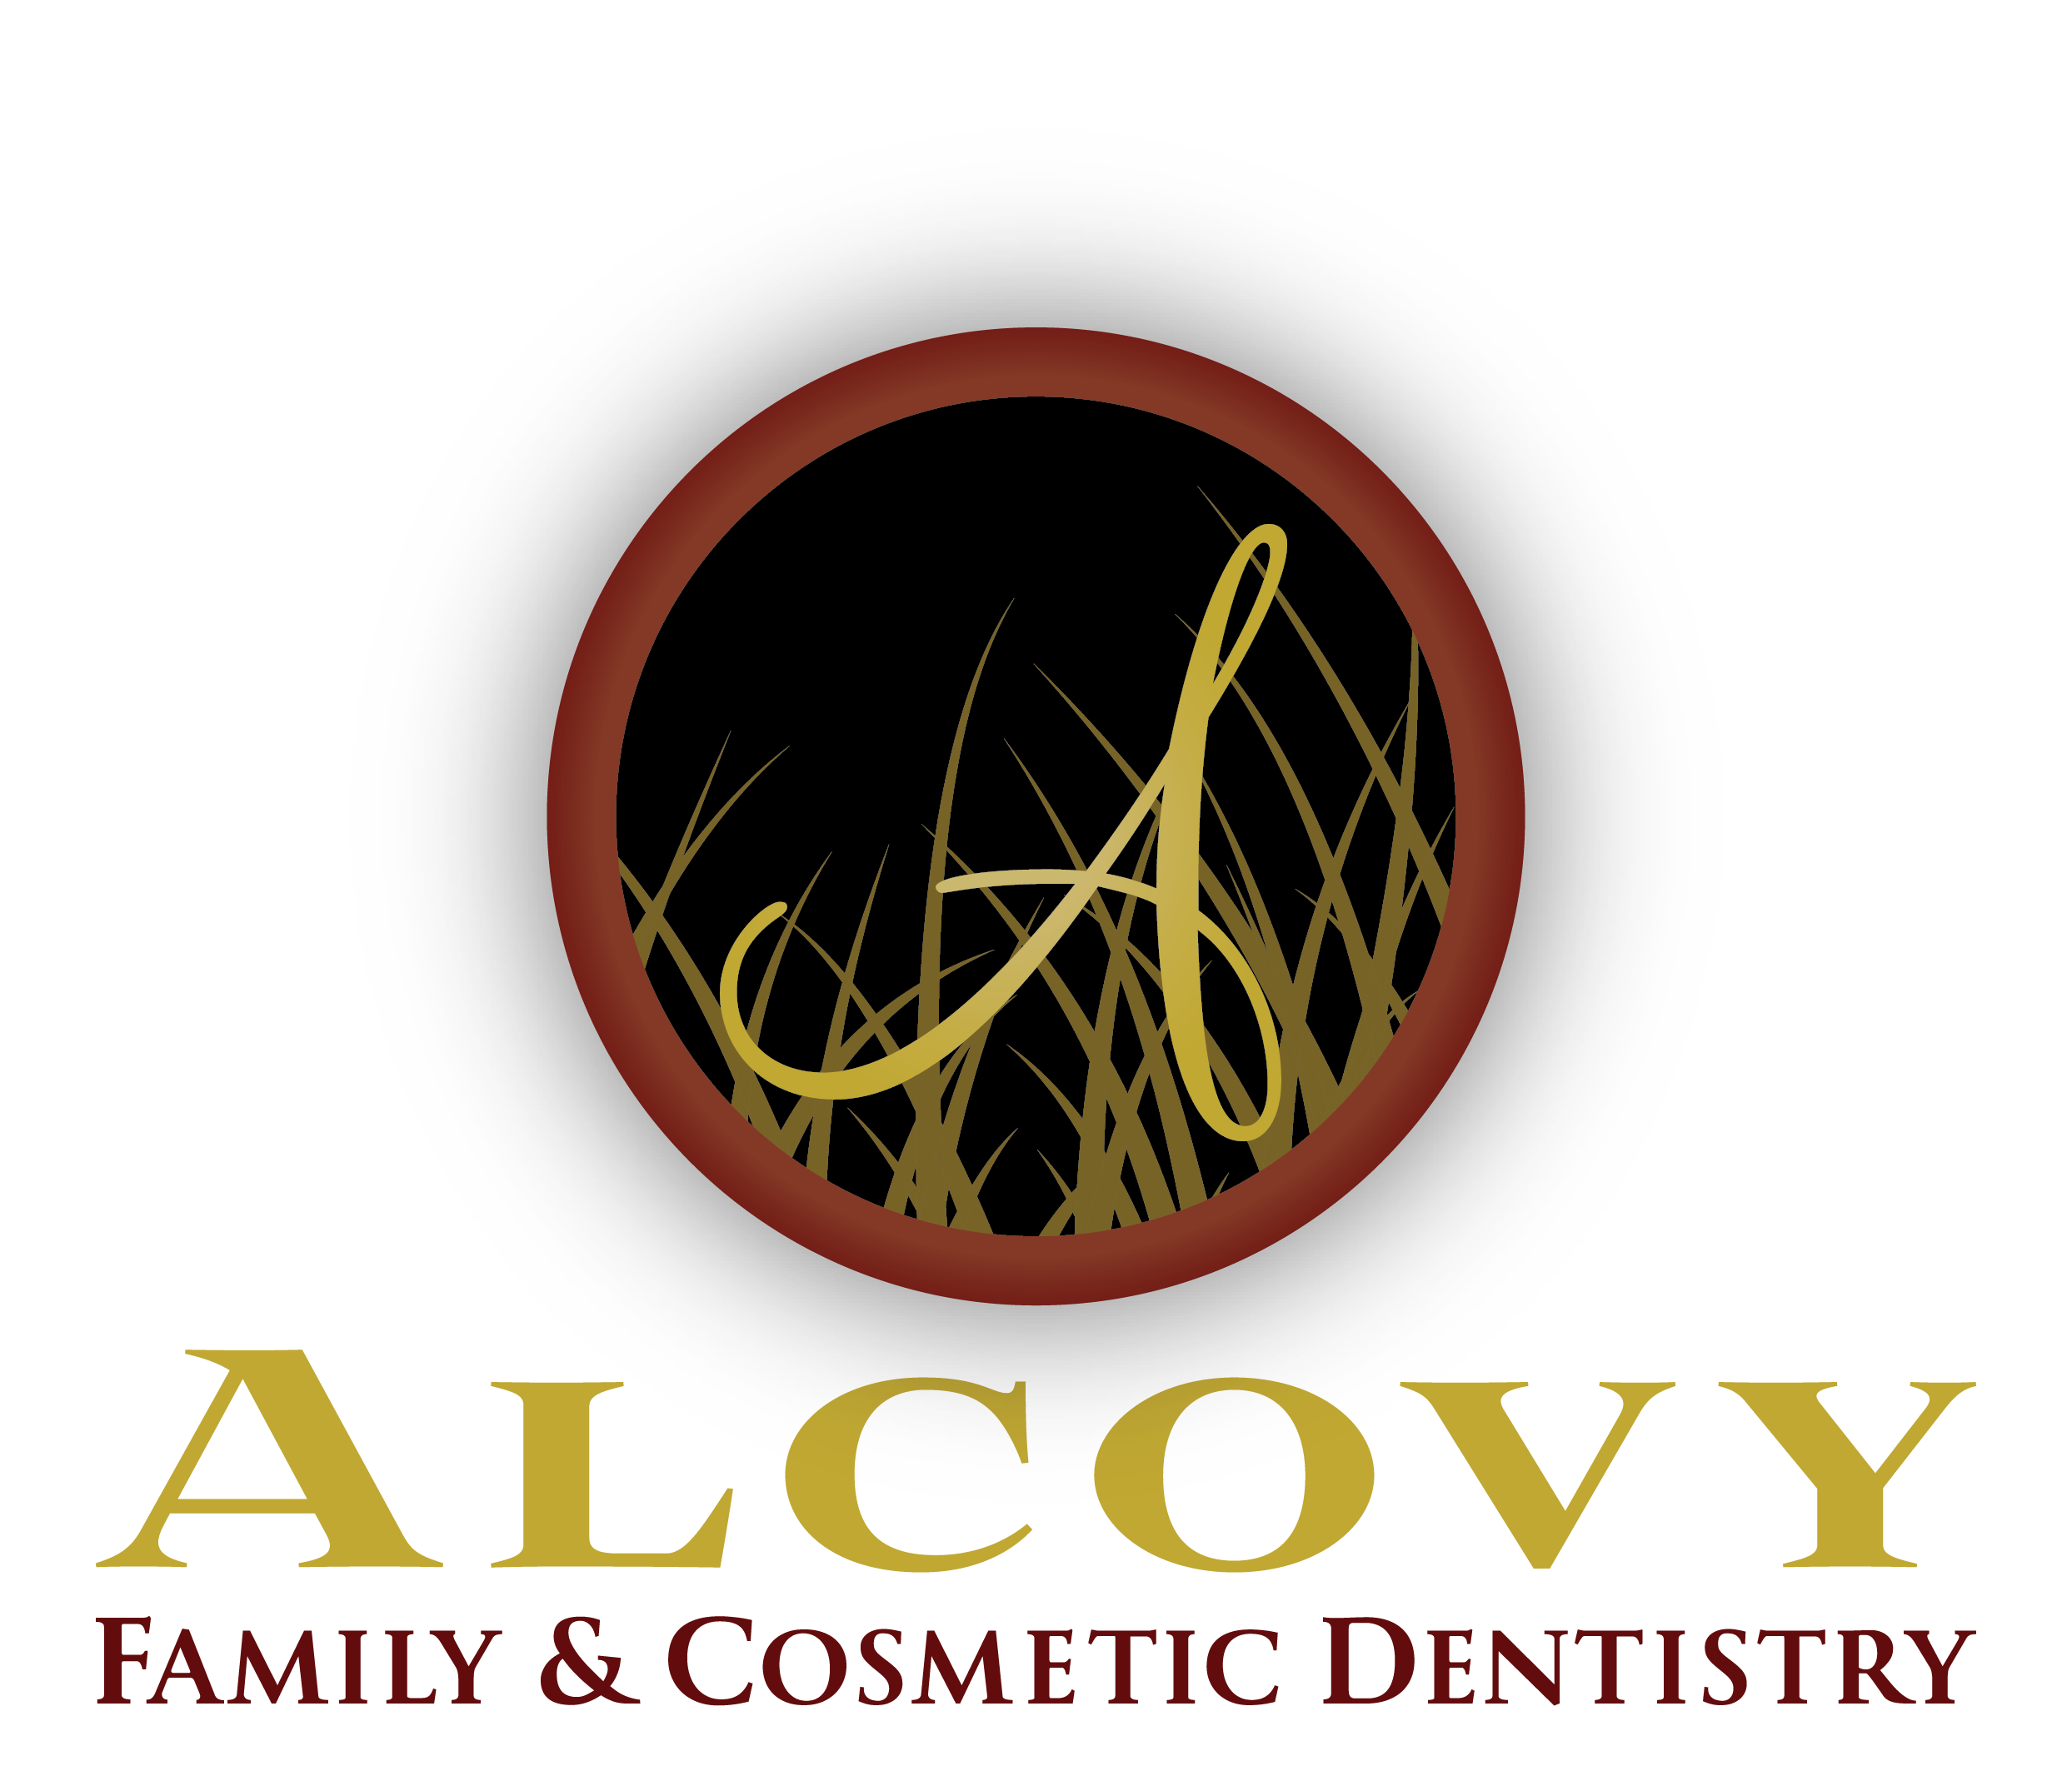 Alcovy Family & Cosmetic Dentistry